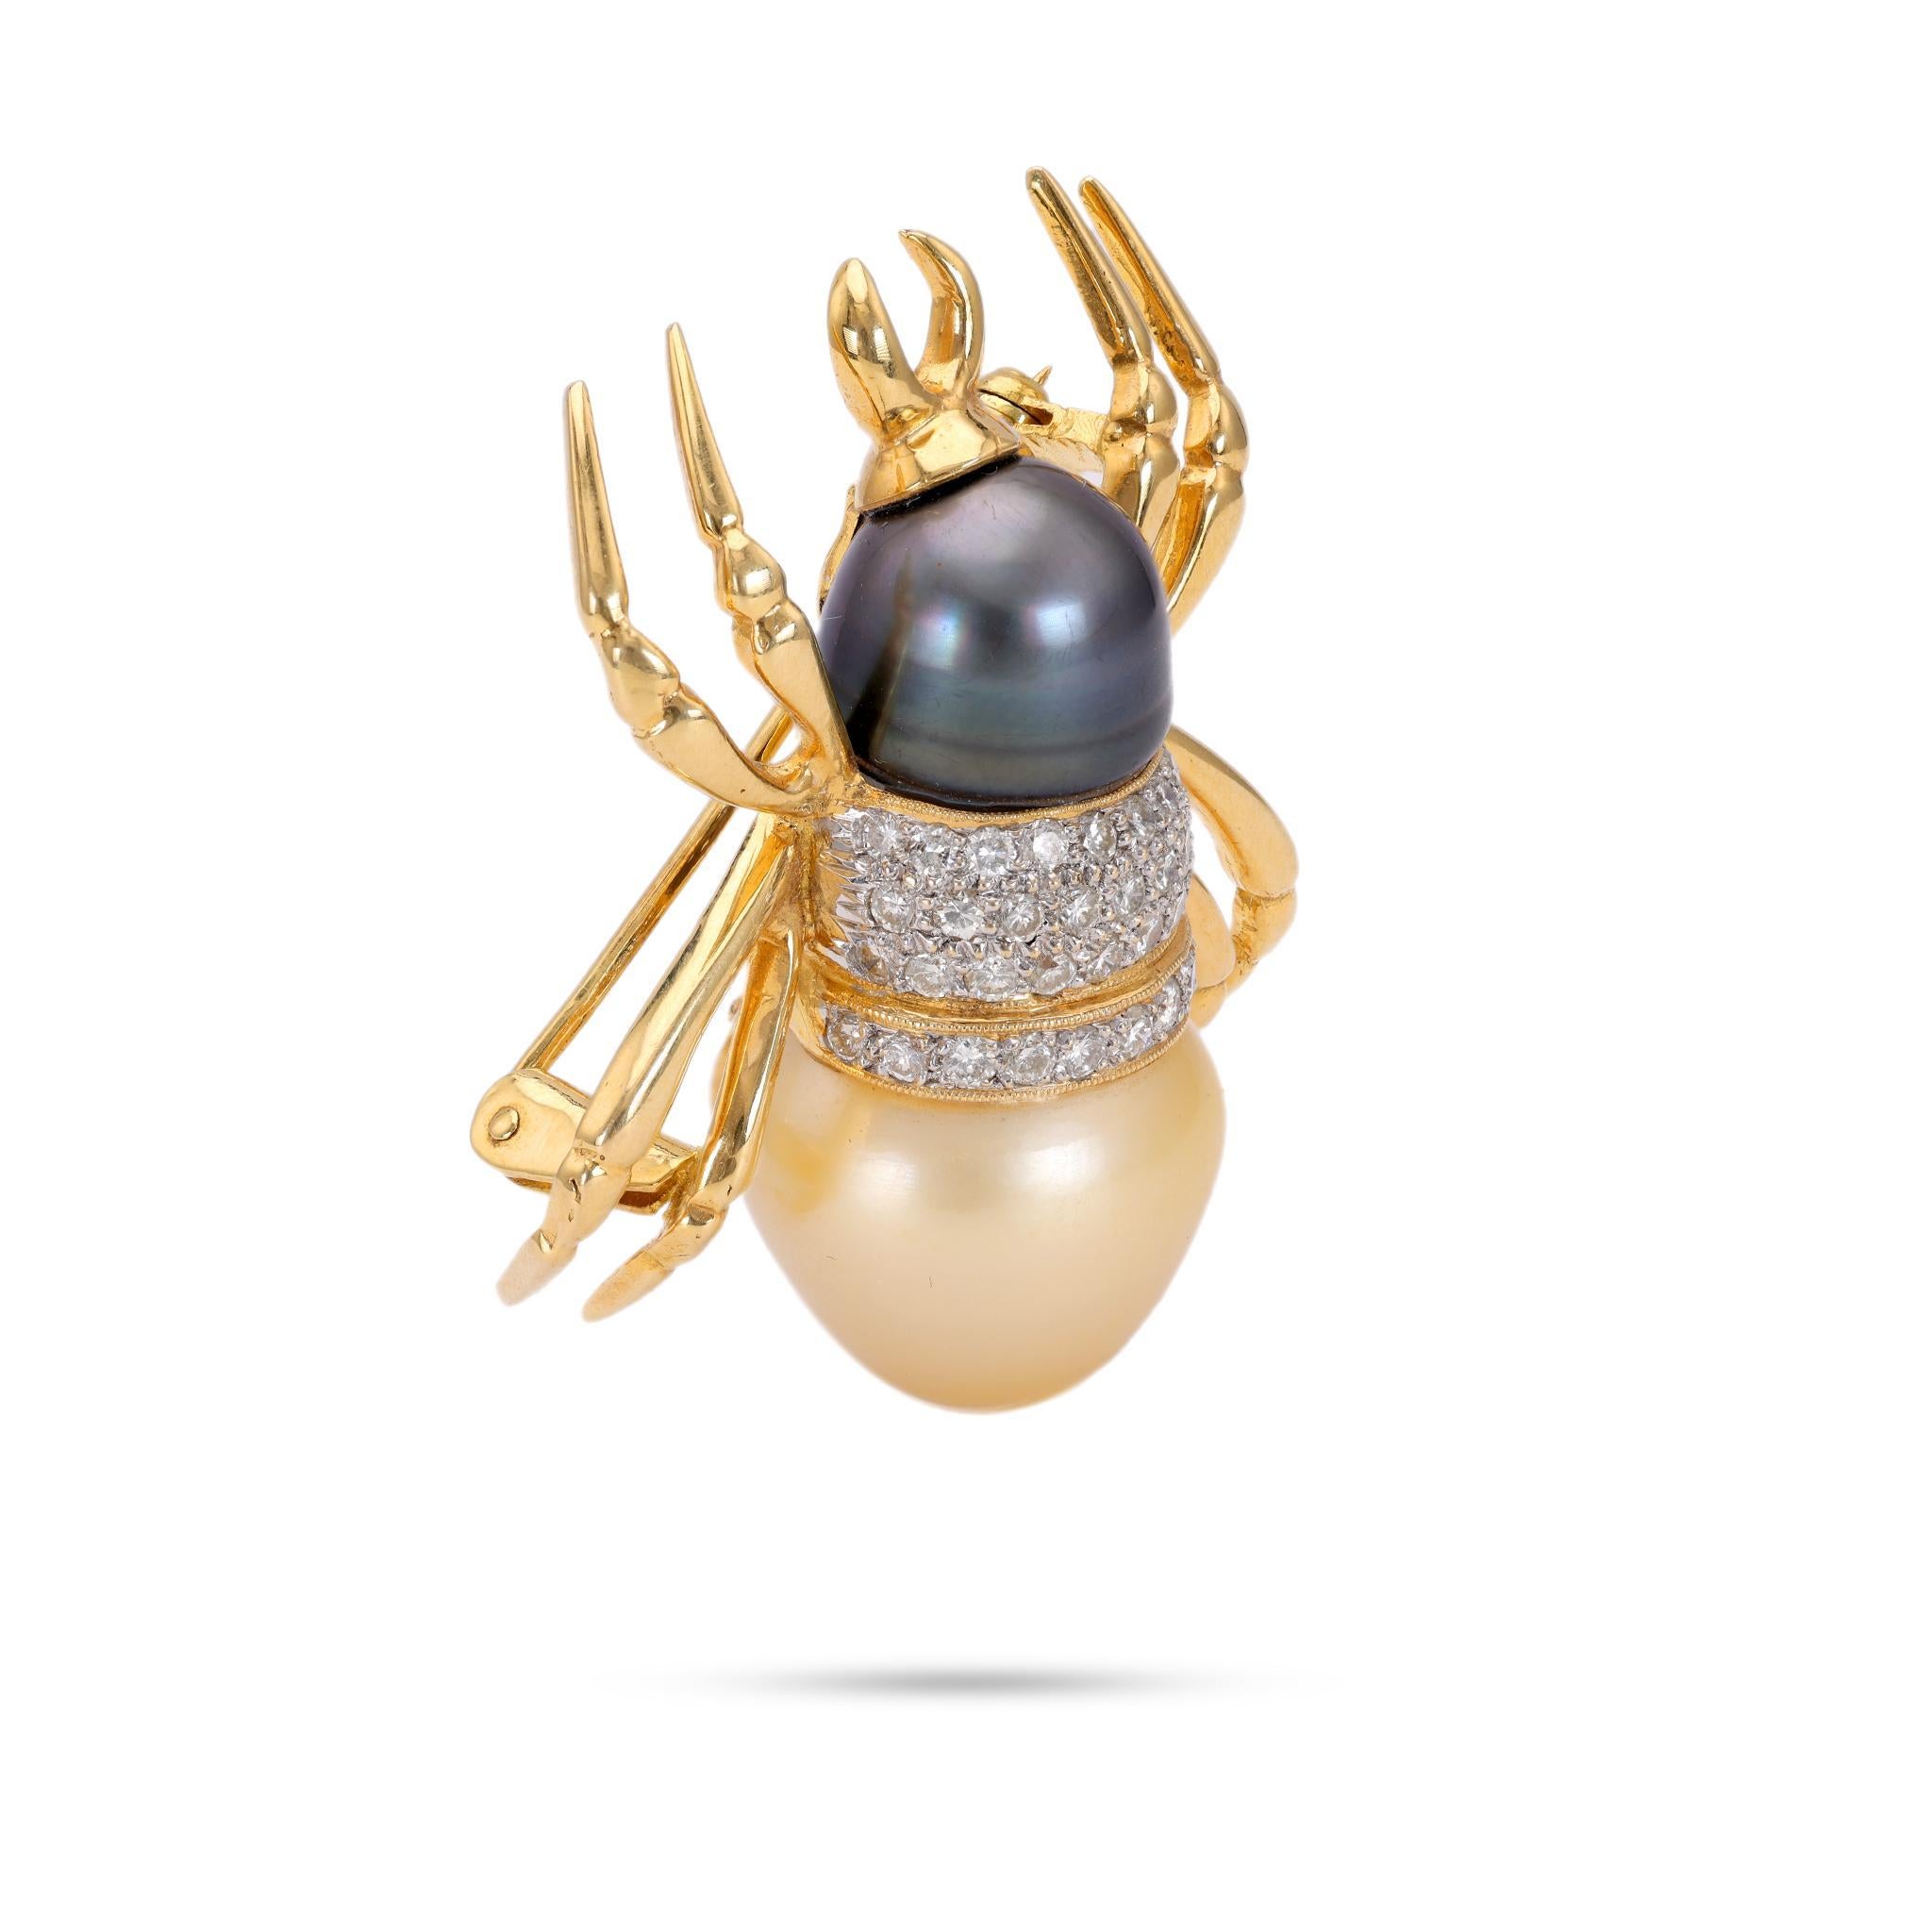 Brilliant Cut Vintage Pearl Diamond 18k Yellow Gold Spider Brooch For Sale